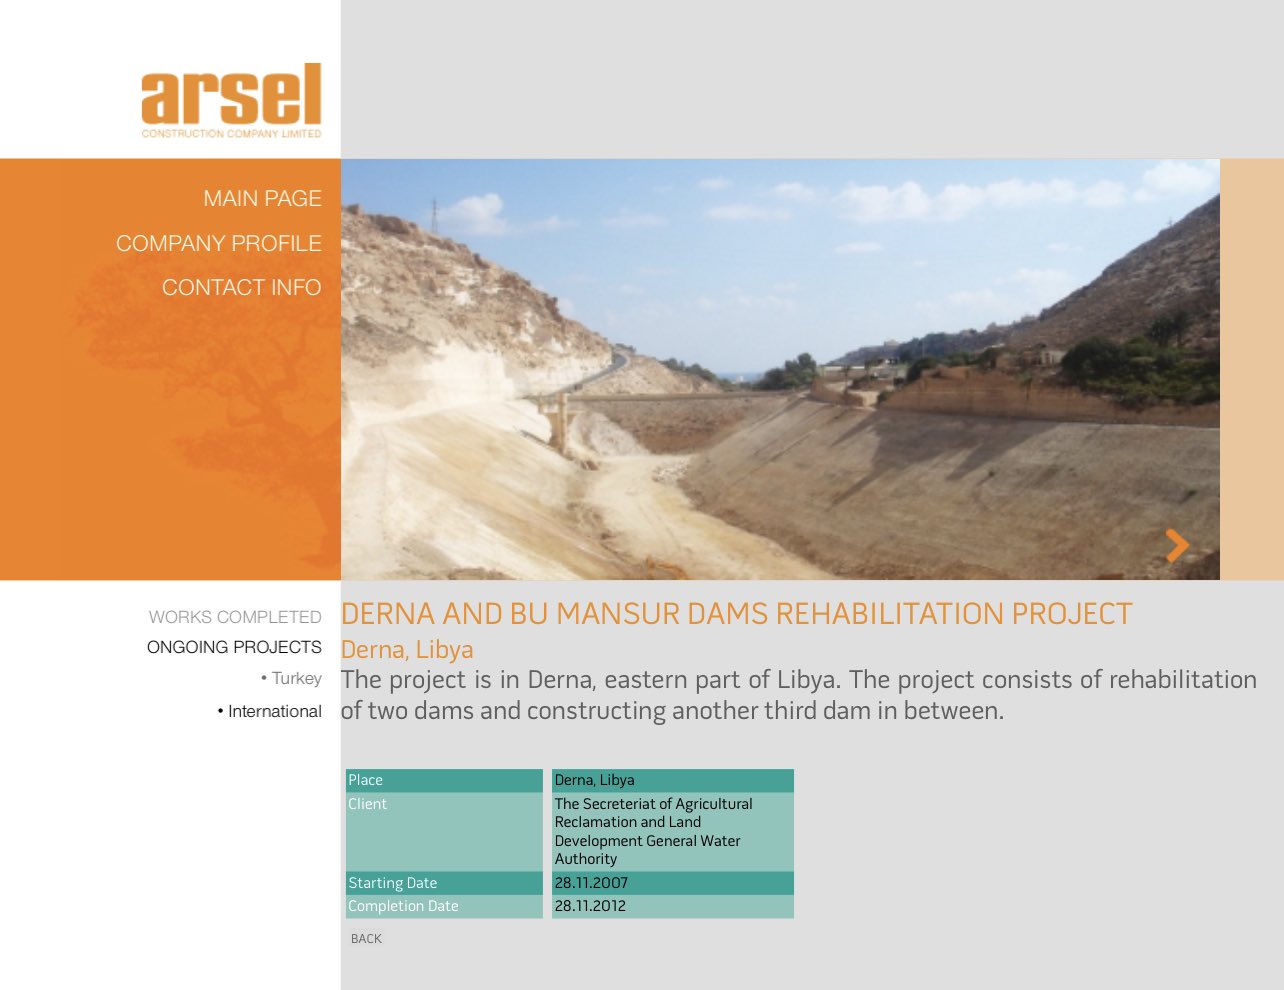 A screenshot from Arsel's now-defunct website claiming work on the dams project was completed in 2012